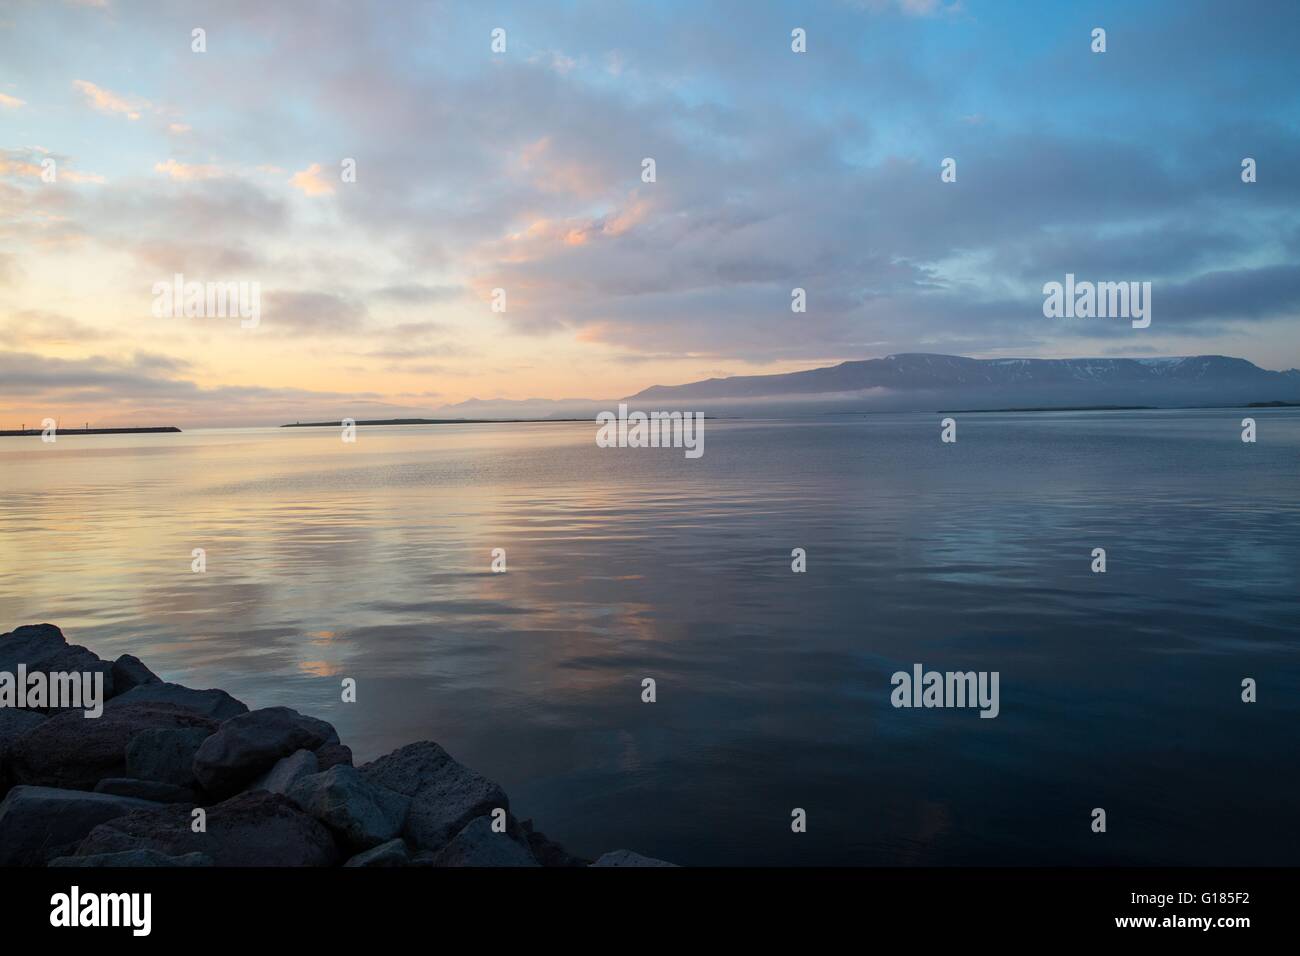 View across ocean and dramatic sky at sunset, Reykjavik, Iceland Stock Photo